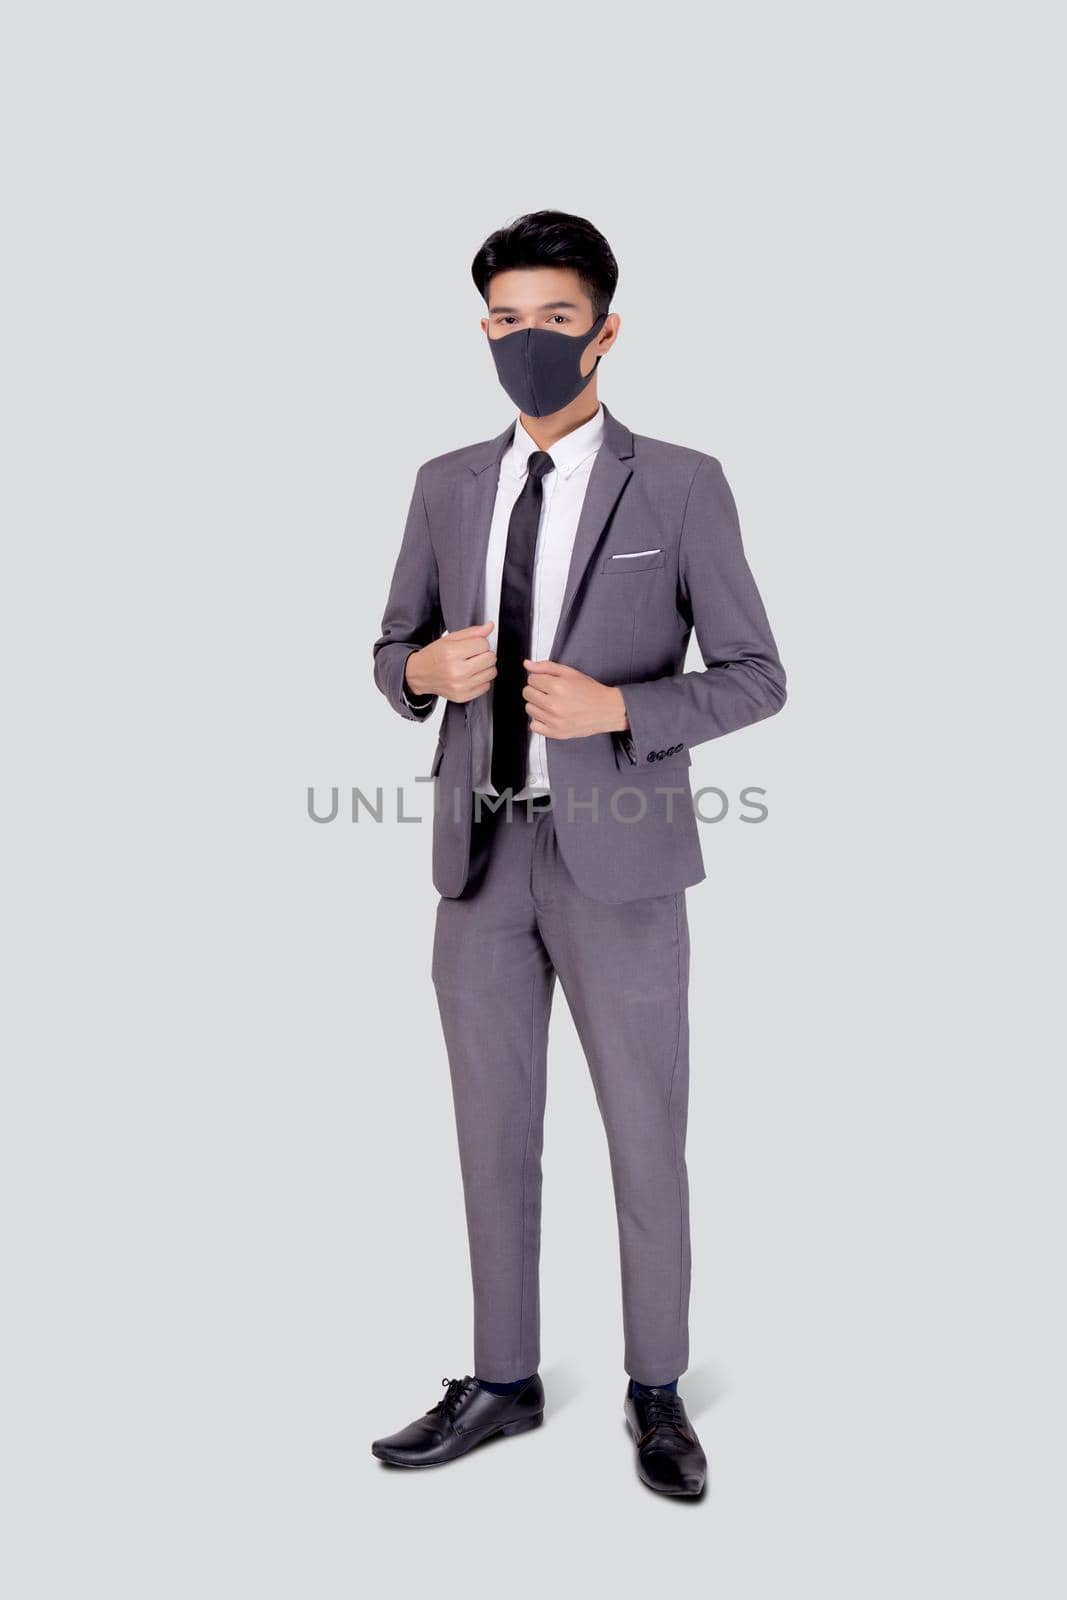 Portrait young asian businessman in suit confident wearing face mask for protective covid-19 isolated on white background, business man medical mask, quarantine for pandemic coronavirus.